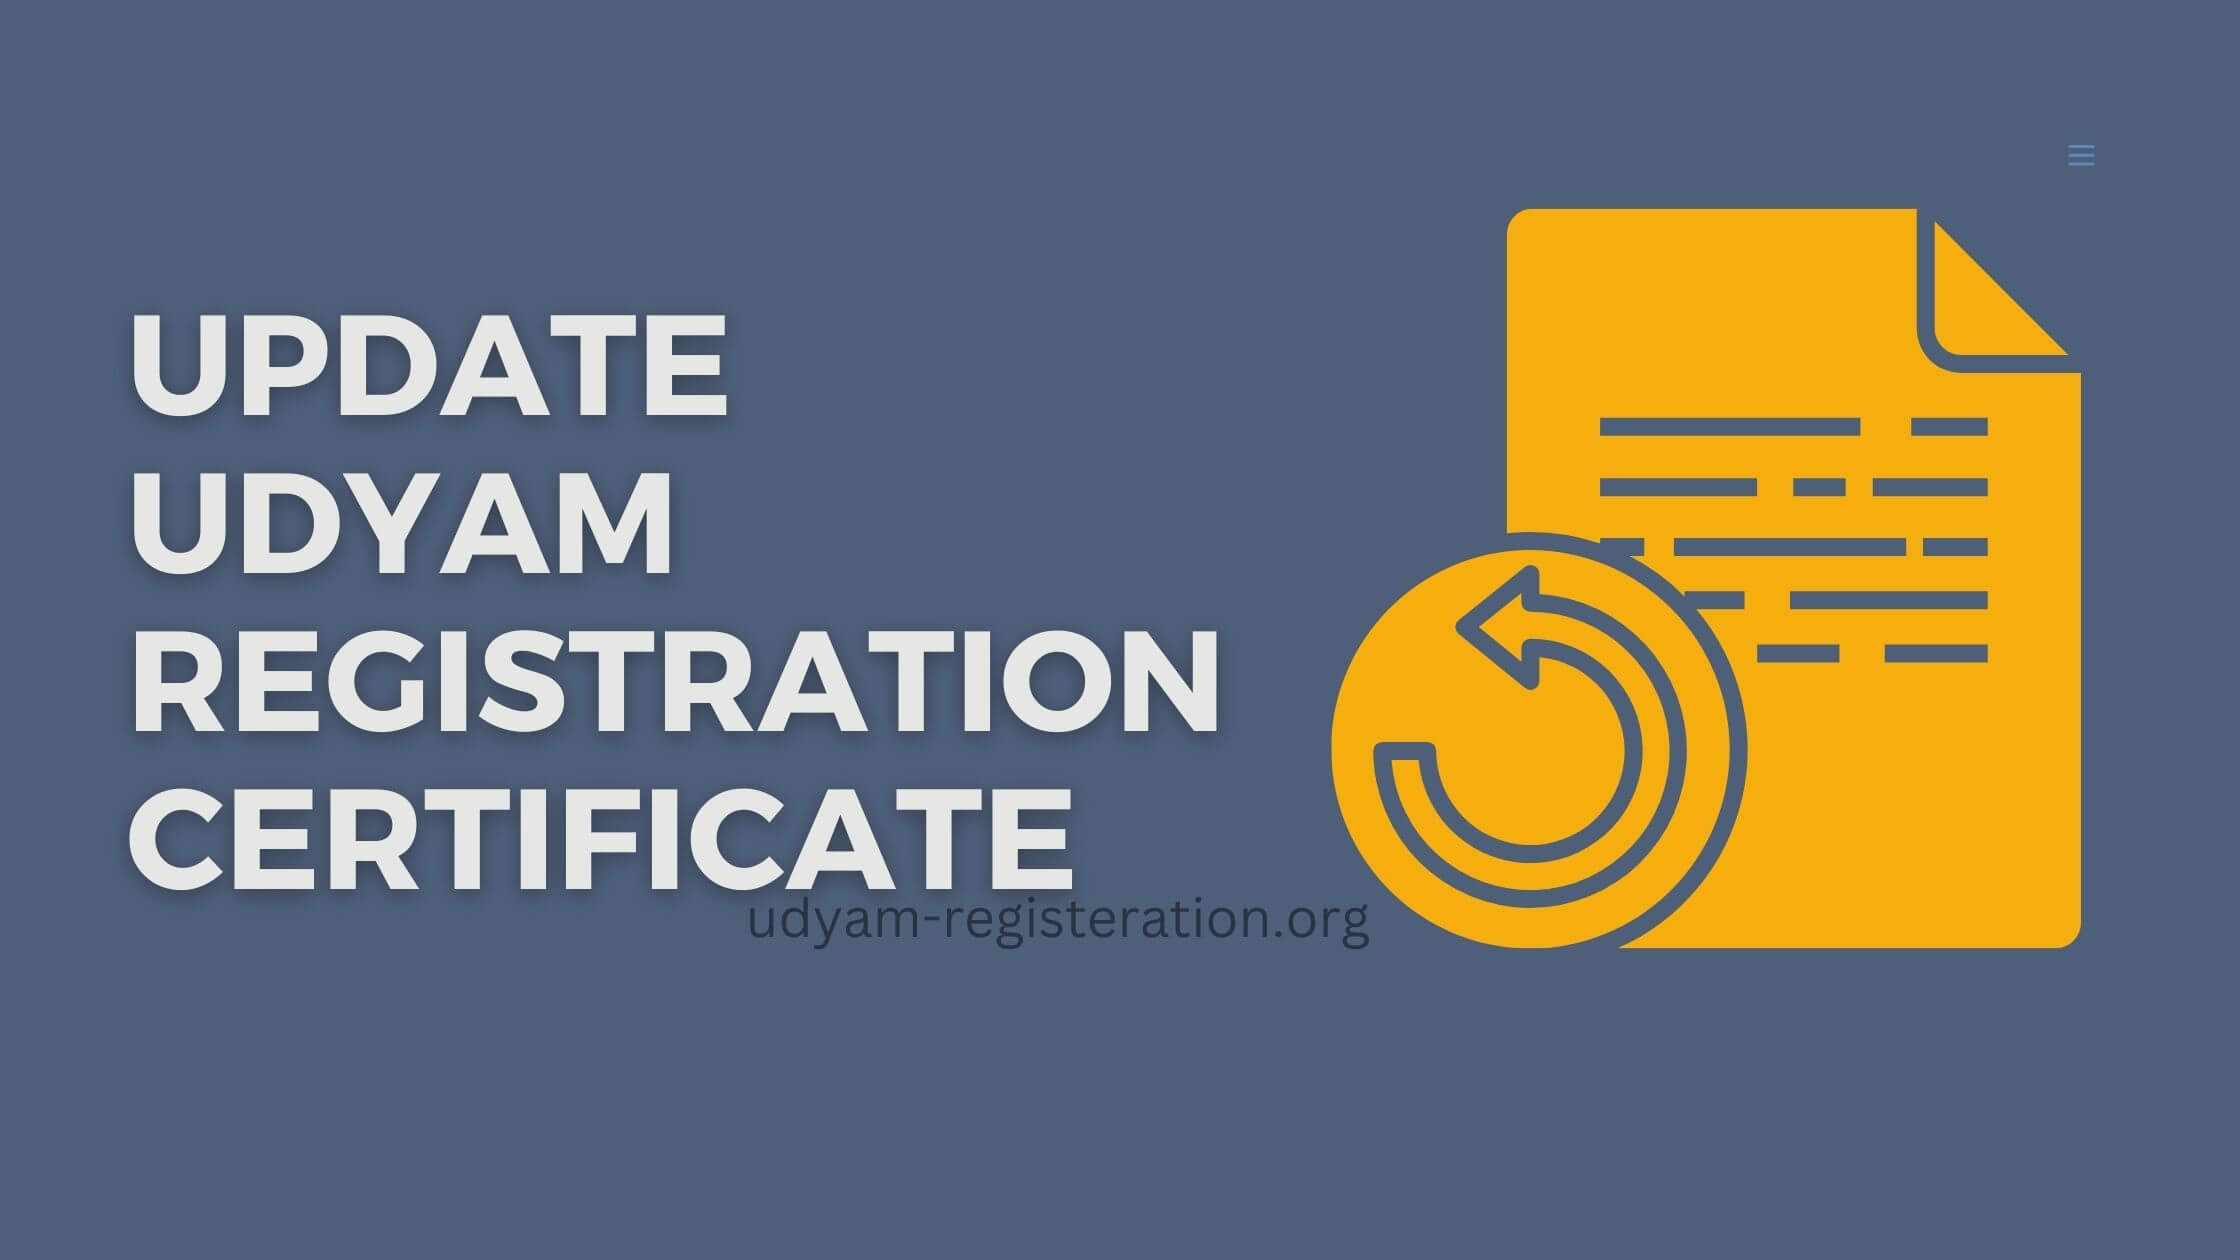 How To Update Udyam Registration Certificate?